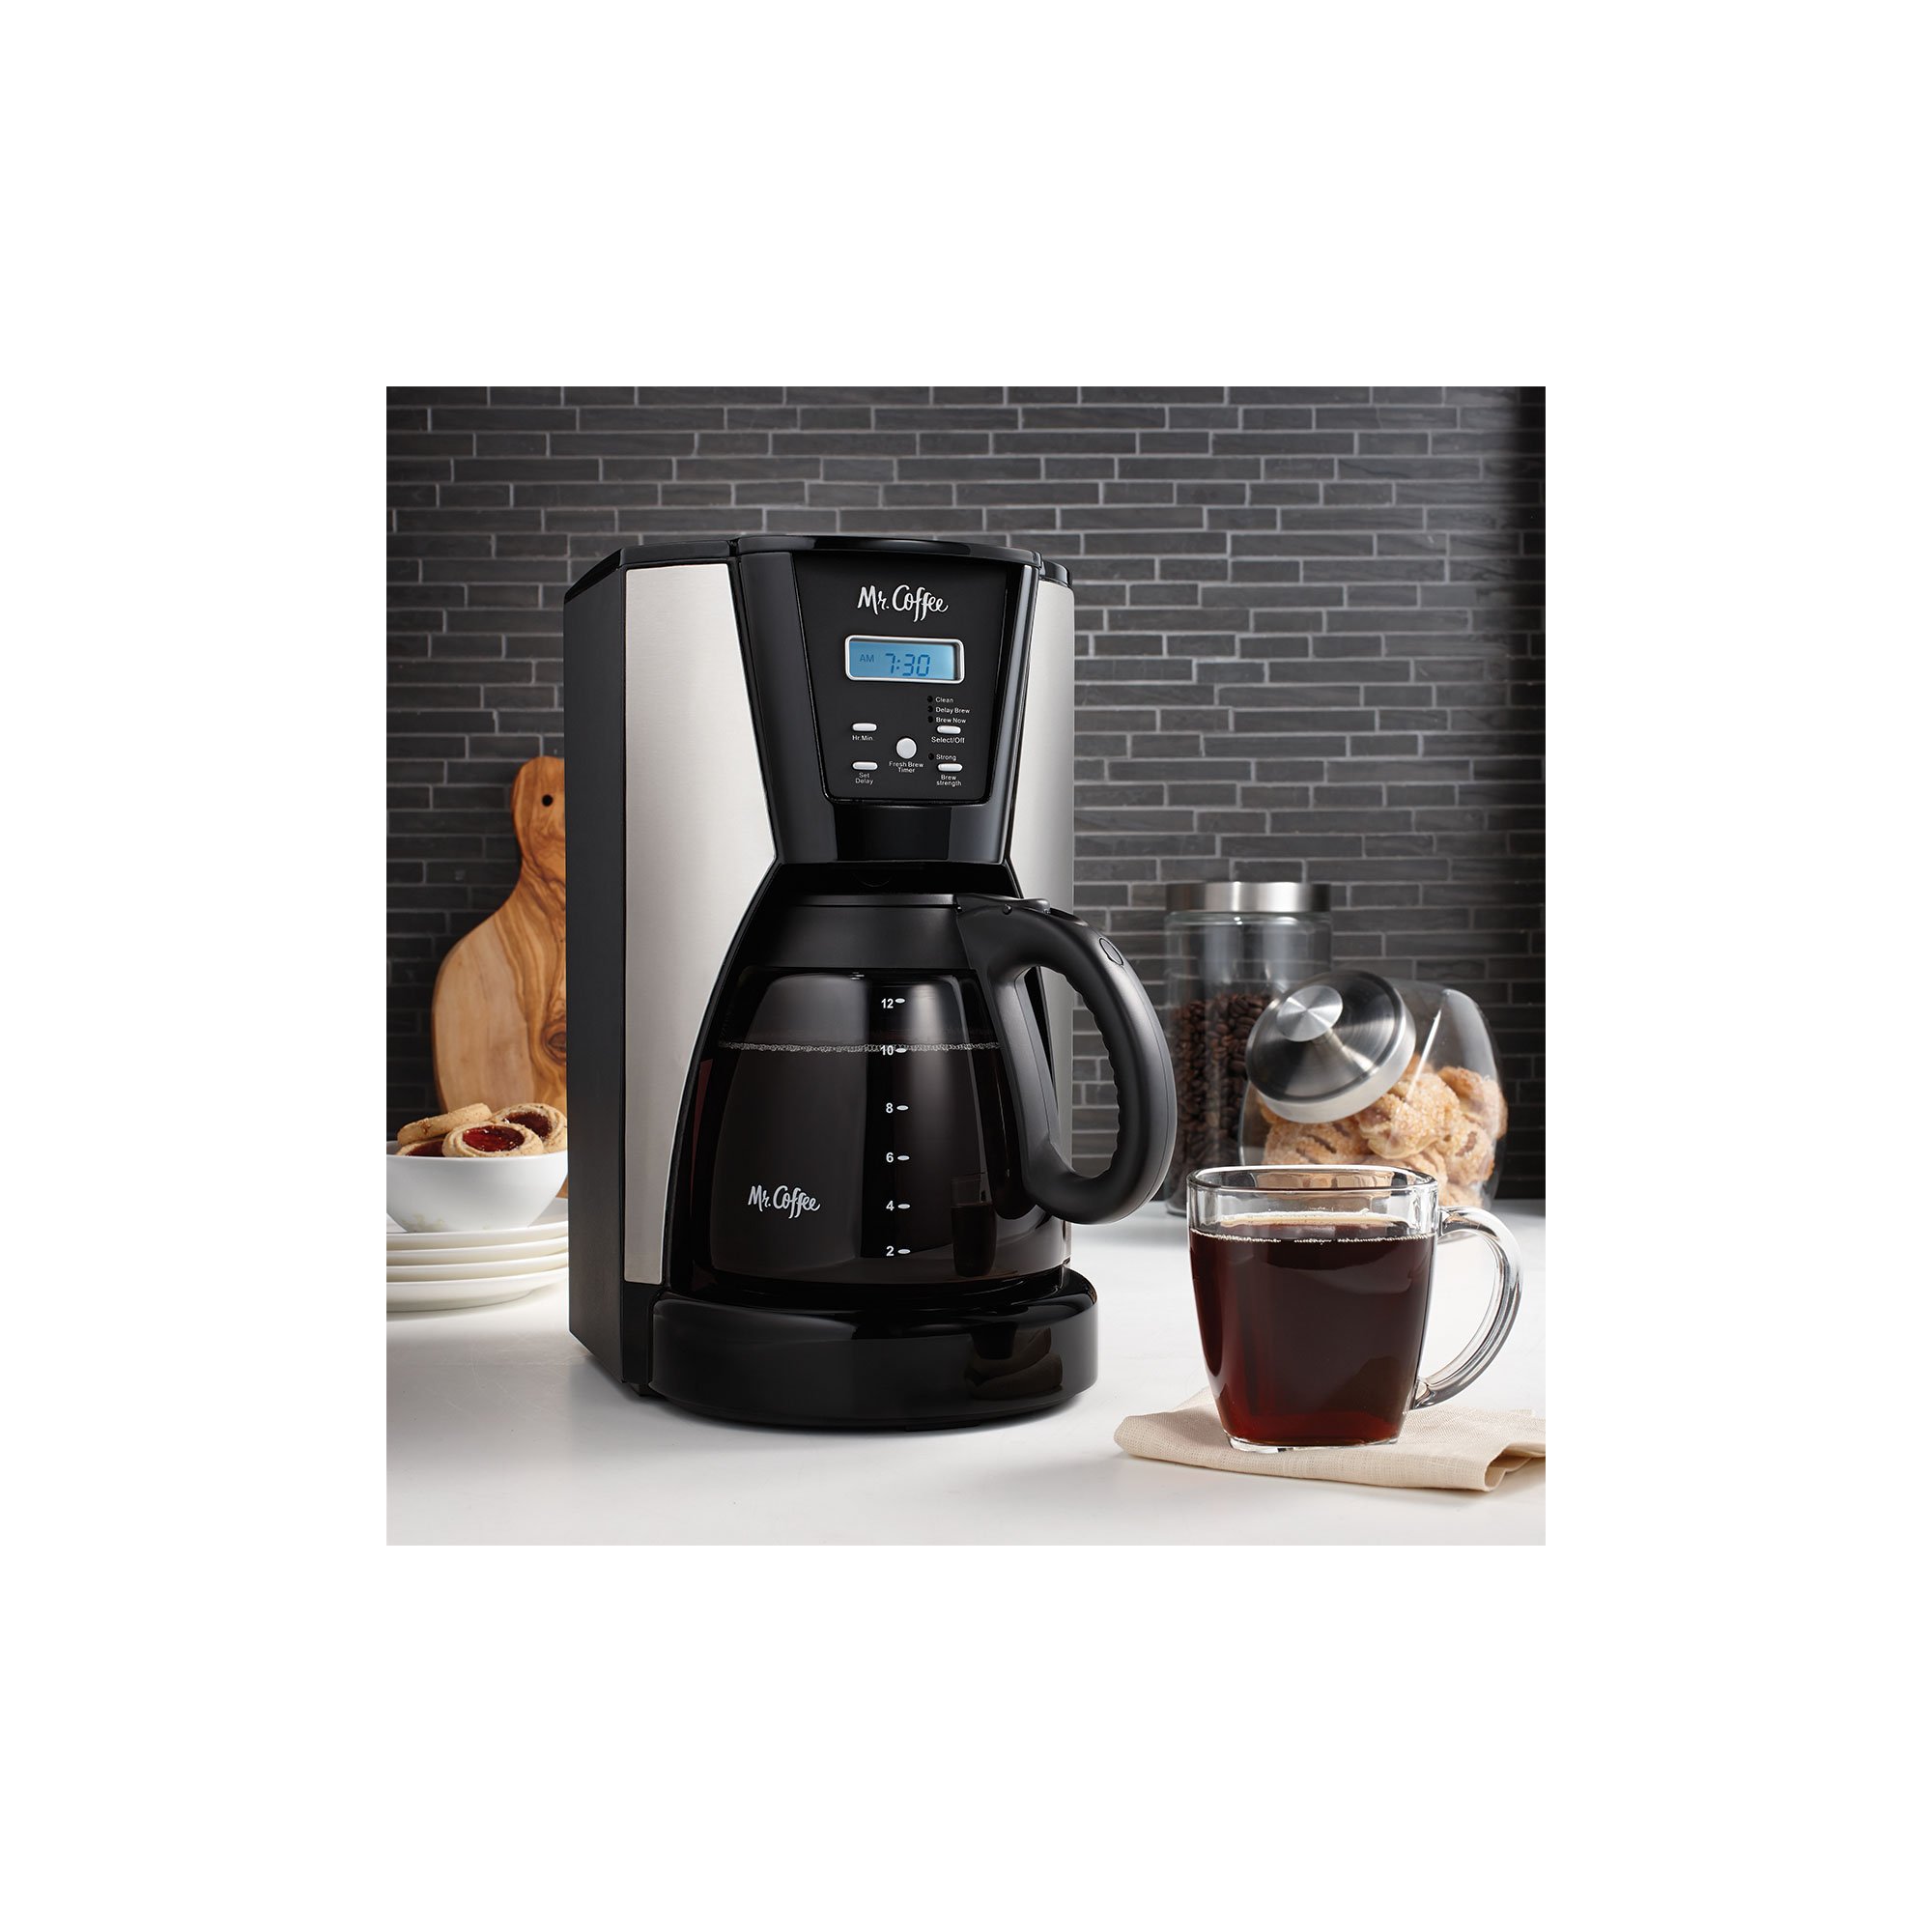 Mr. Coffee® 12-Cup Programmable Coffee Maker 